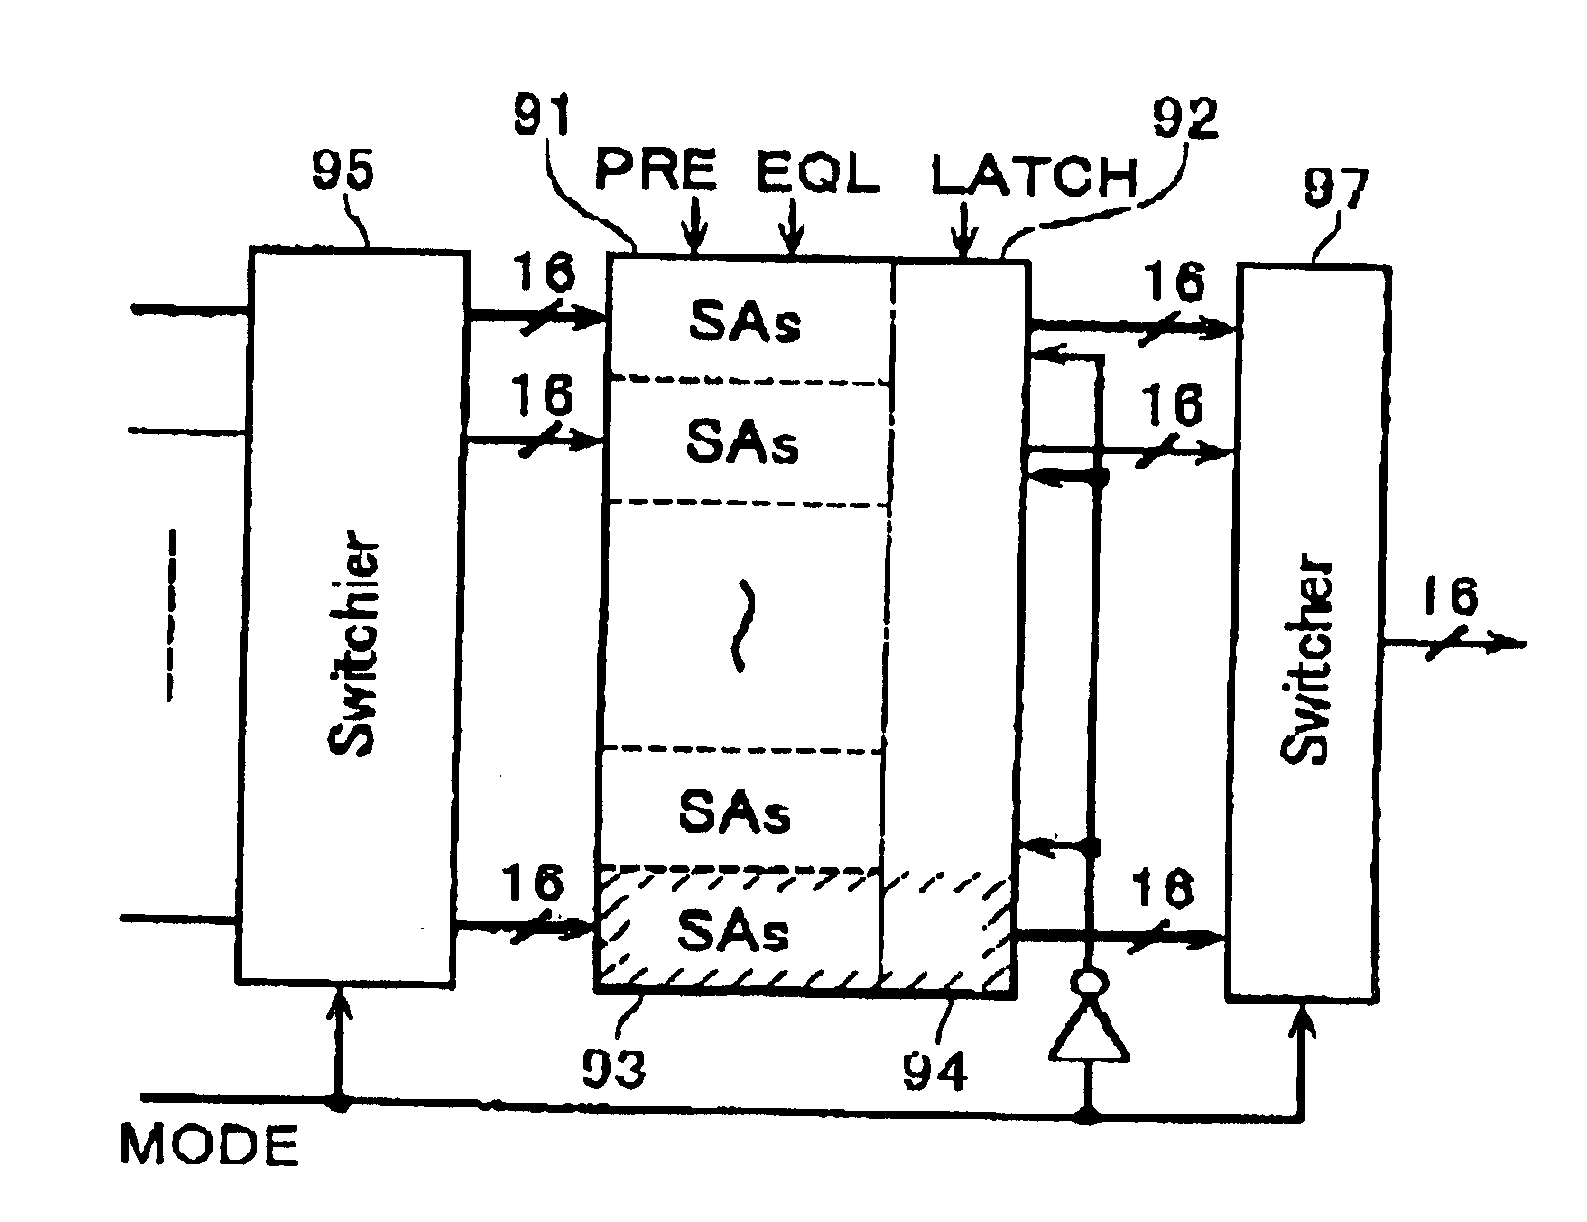 Nonvolatile semiconductor memory device with first and second read modes